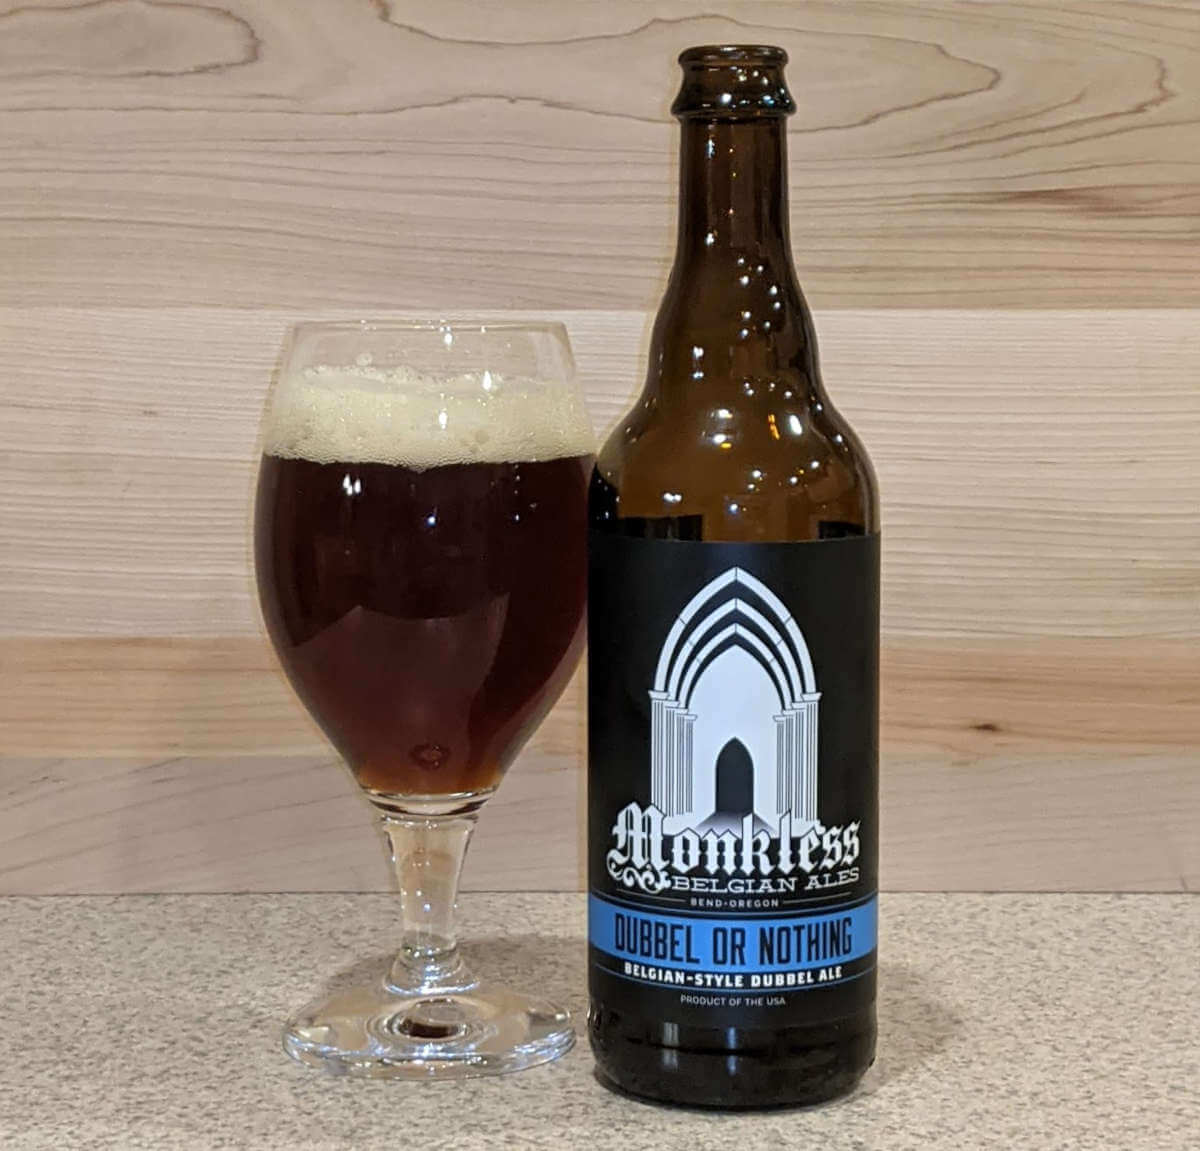 Latest print article: Profiling gold medal-winning Dubbel or Nothing from Monkless Belgian Ales